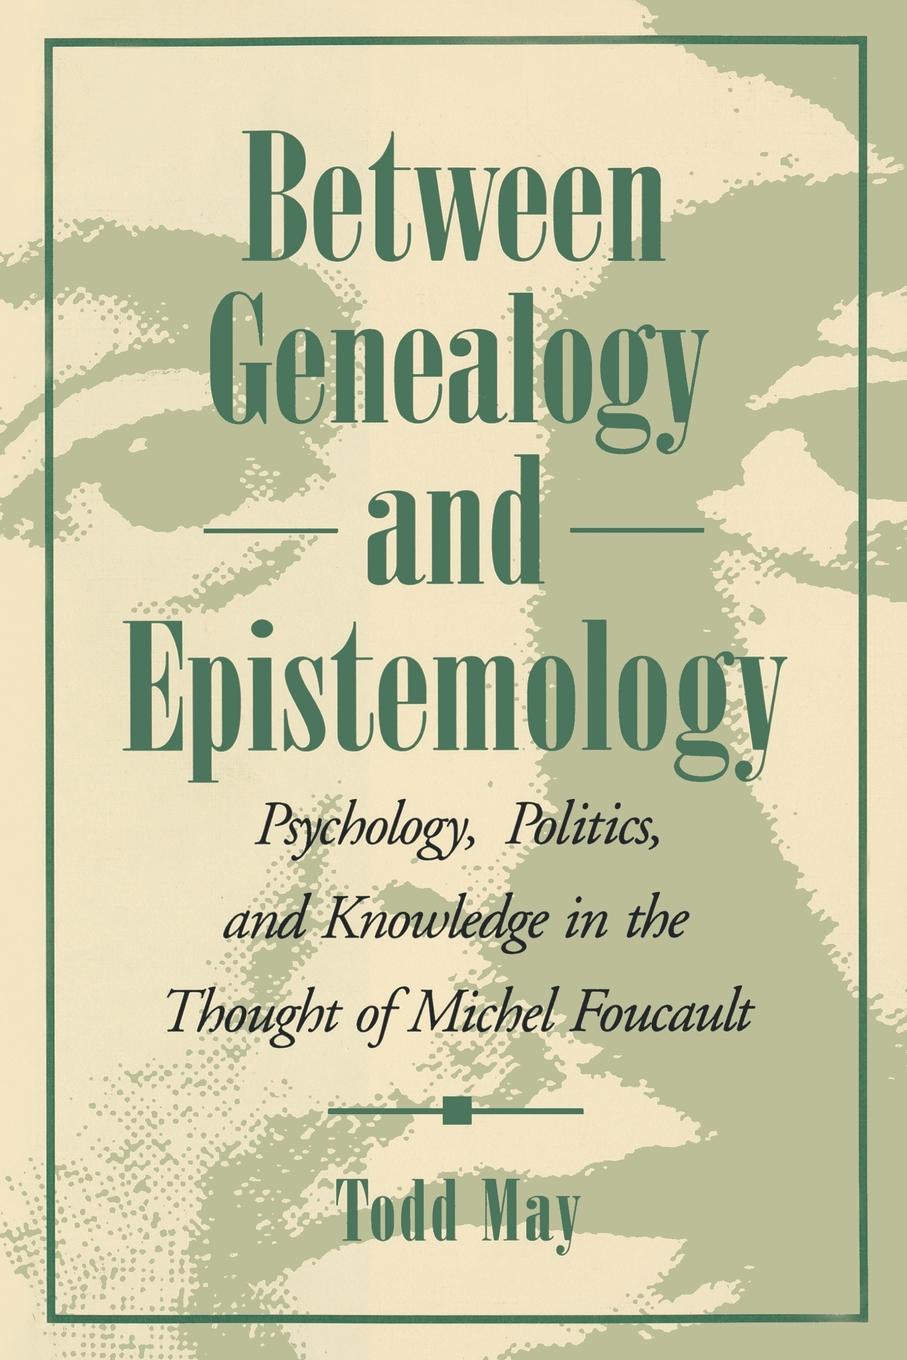 Between Genealogy and Epistemology. Psychology, Politics, and Knowledge in the Thought of Michel Foucault